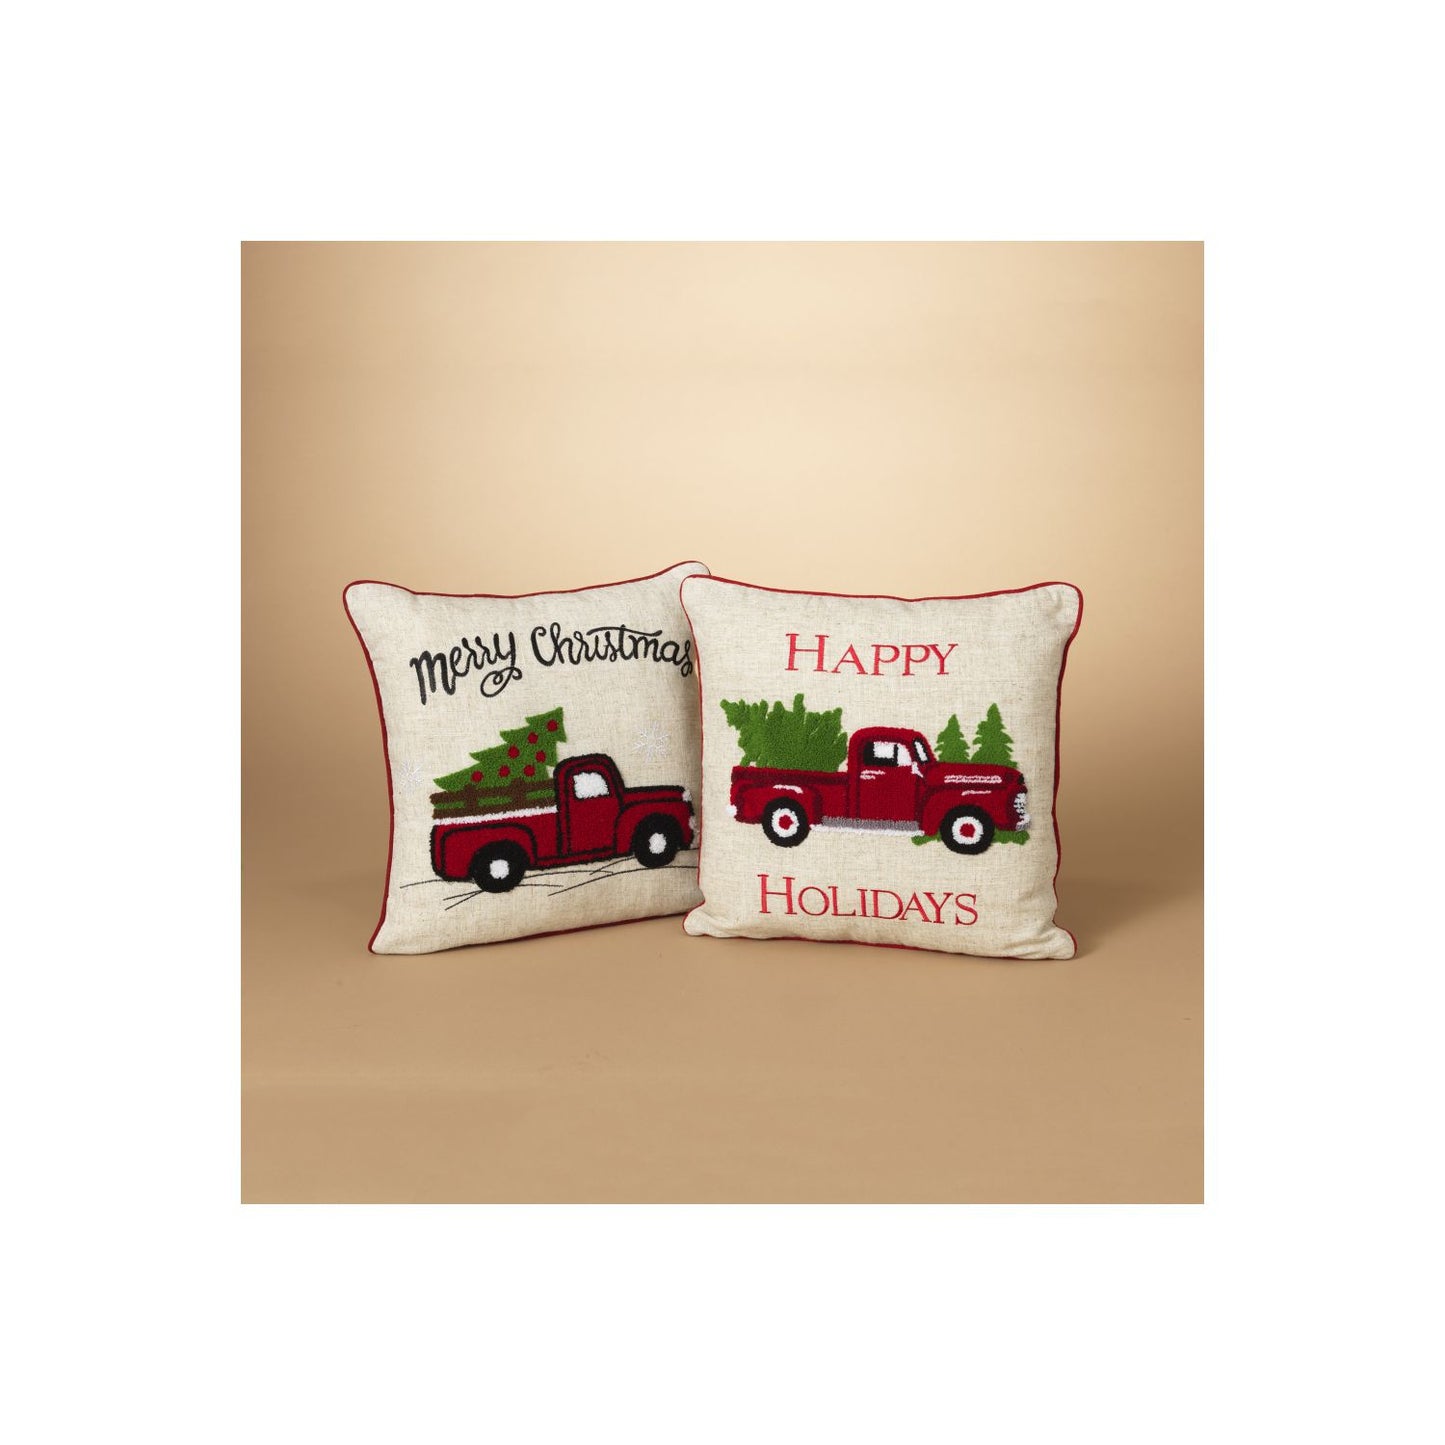 Gerson Company 16"L Fabric "Merry Christmas" And "Happy Holidays" Pillow, 2 Asst